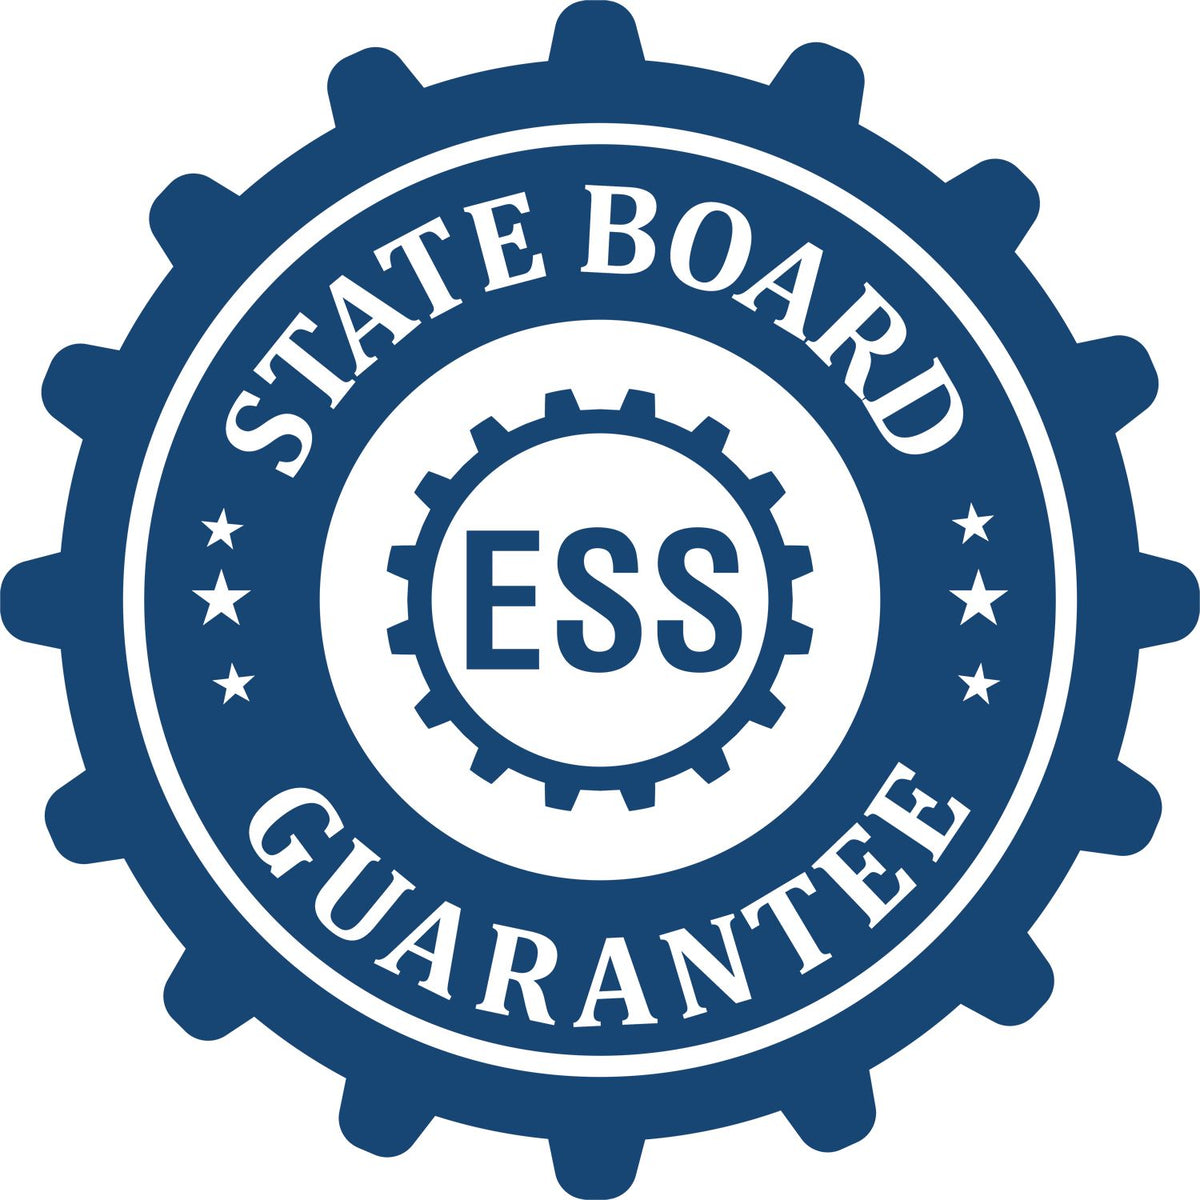 An emblem in a gear shape illustrating a state board guarantee for the Handheld Alabama Land Surveyor Seal product.